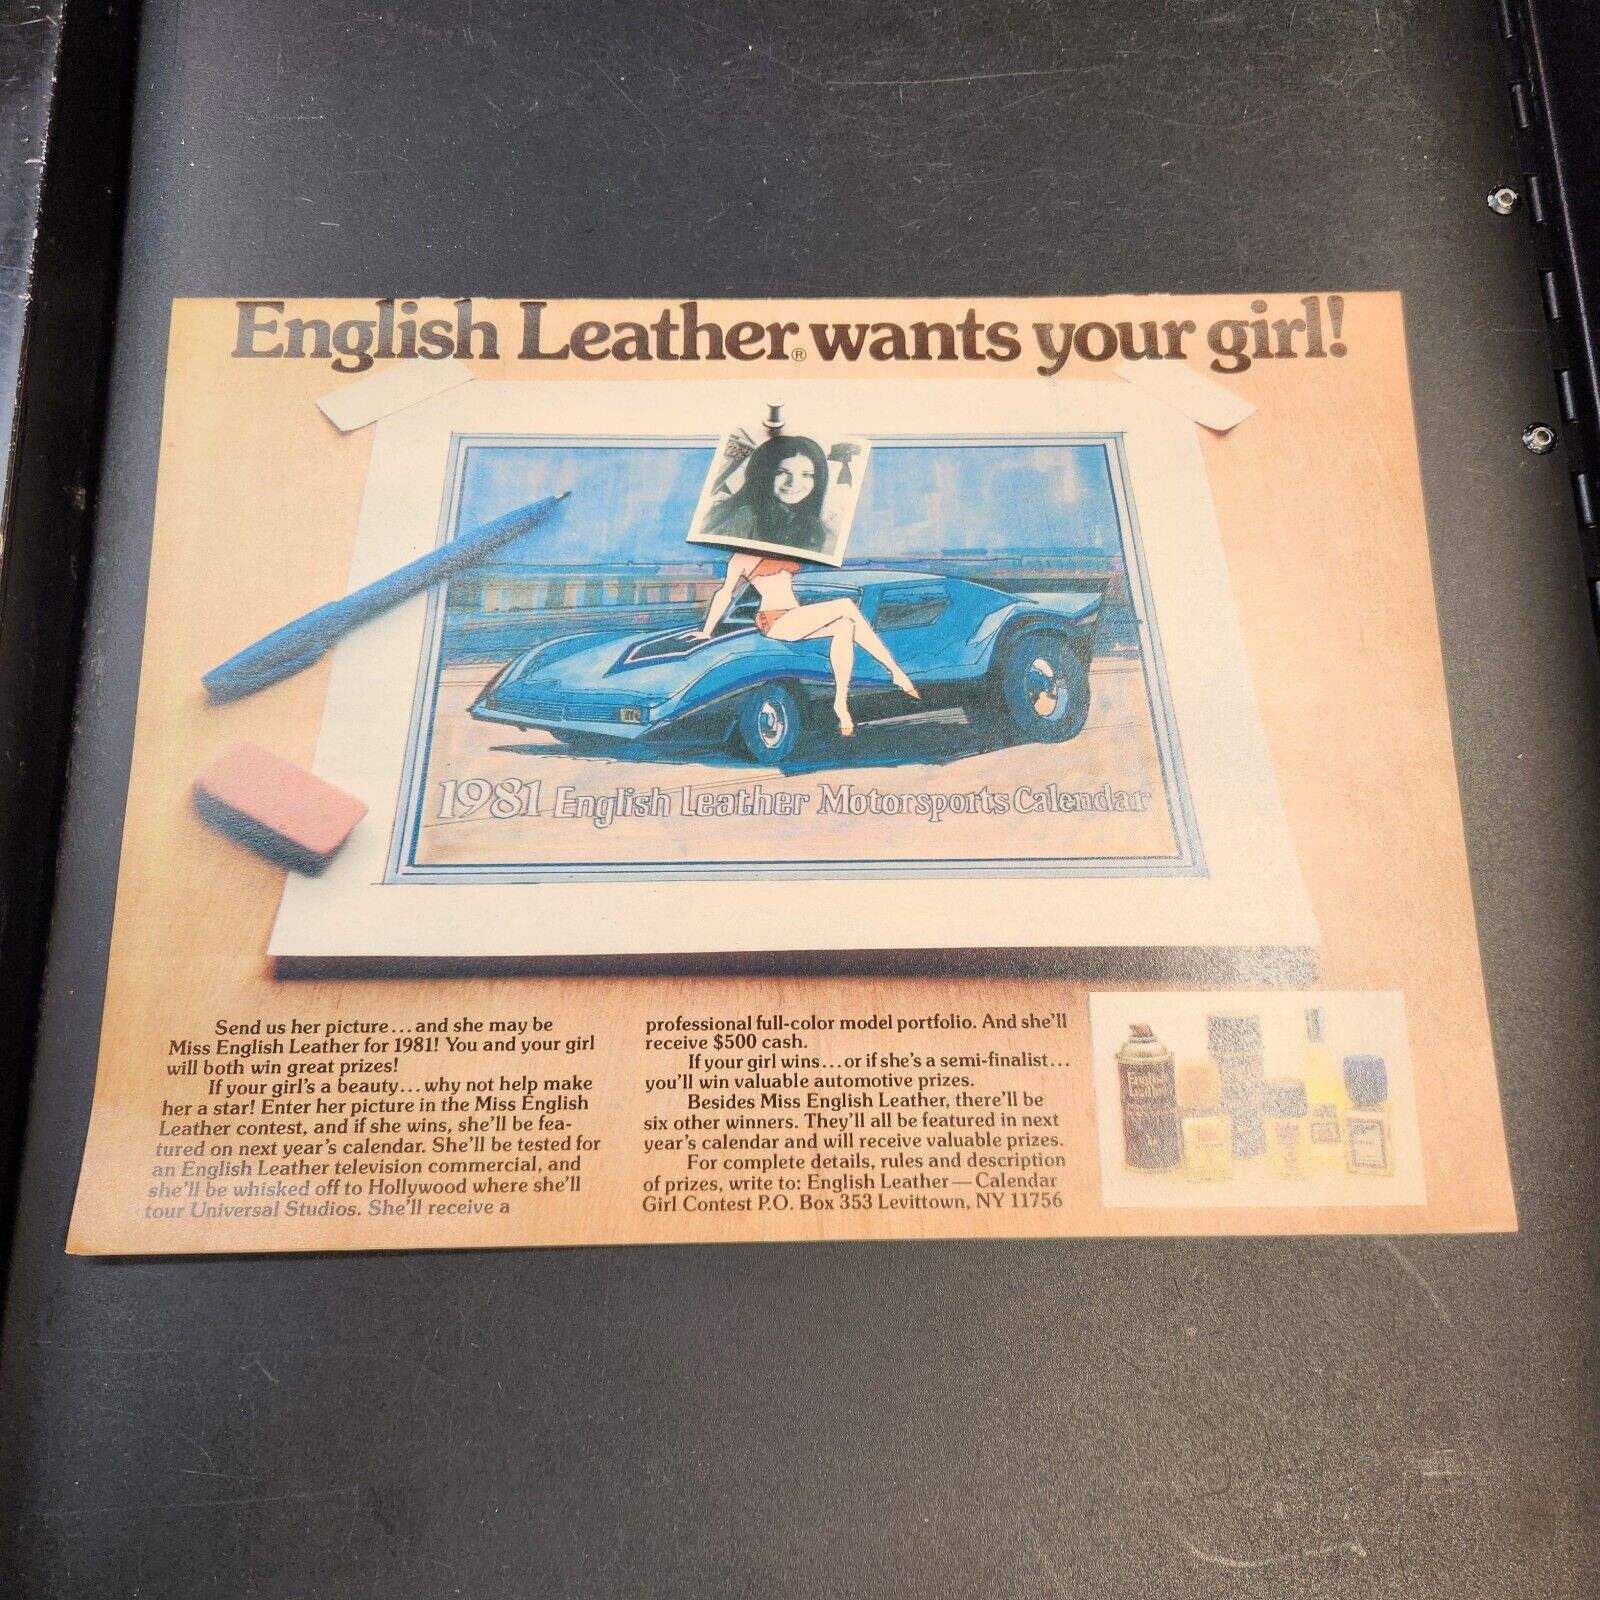 Vintage English Leather Auto Racing Pull Out Calender May 1980 - April 1981.